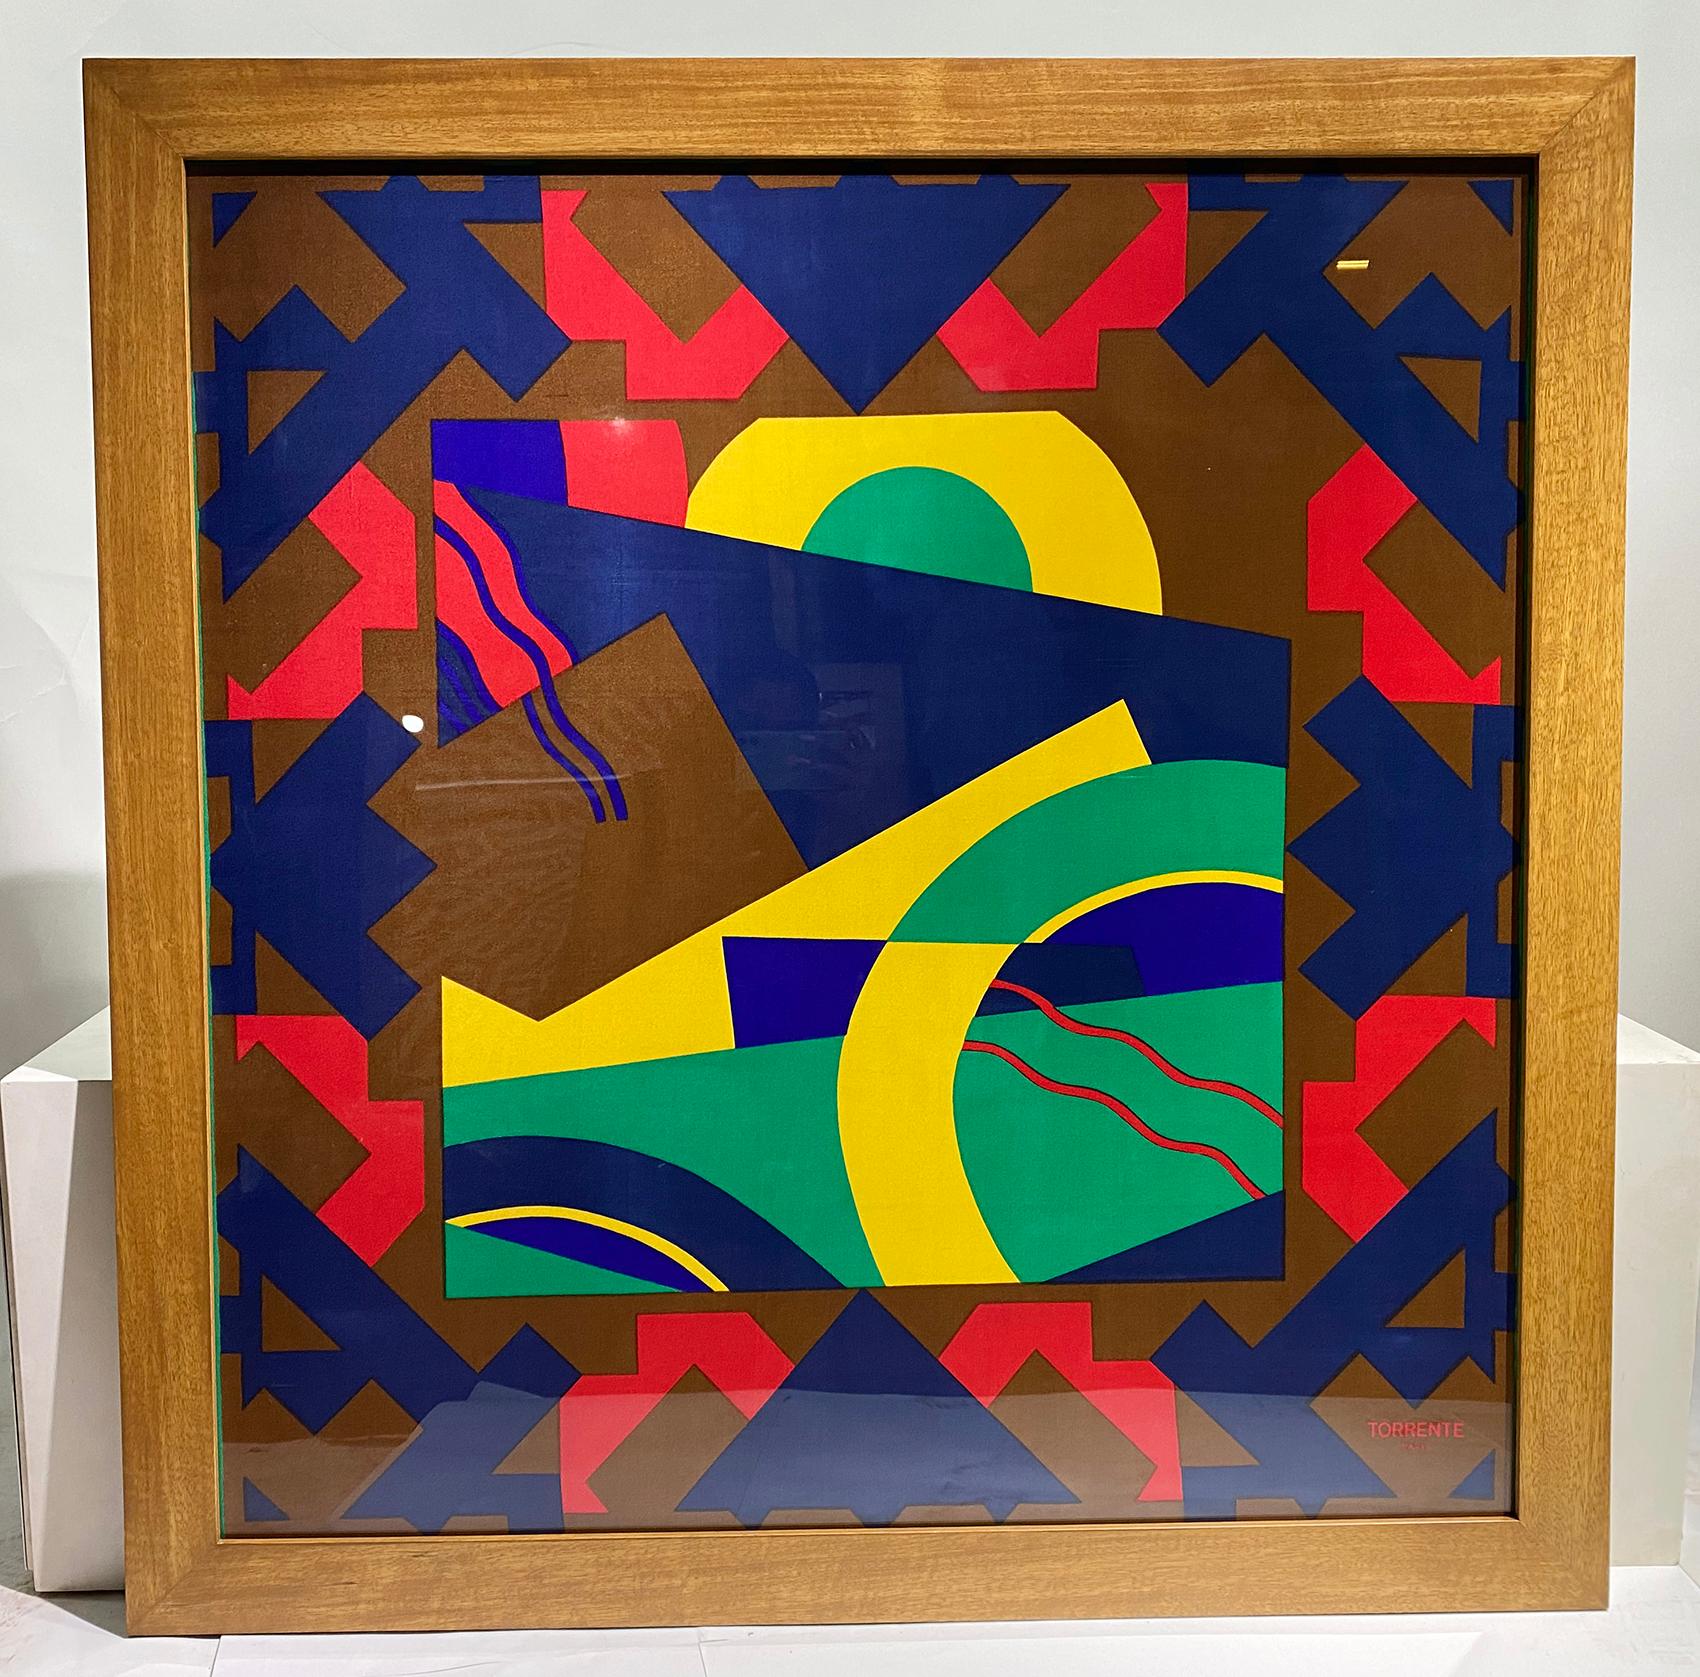 Rare, framed Torrente –Paris Silk Scarf , Features colorful geometric shapes, in red blue yellow and green colors on a brown background .
Set in a wooden frame .
Having a signature “Torrente –Paris ” on the left bottom.
Covered with plexiglass on